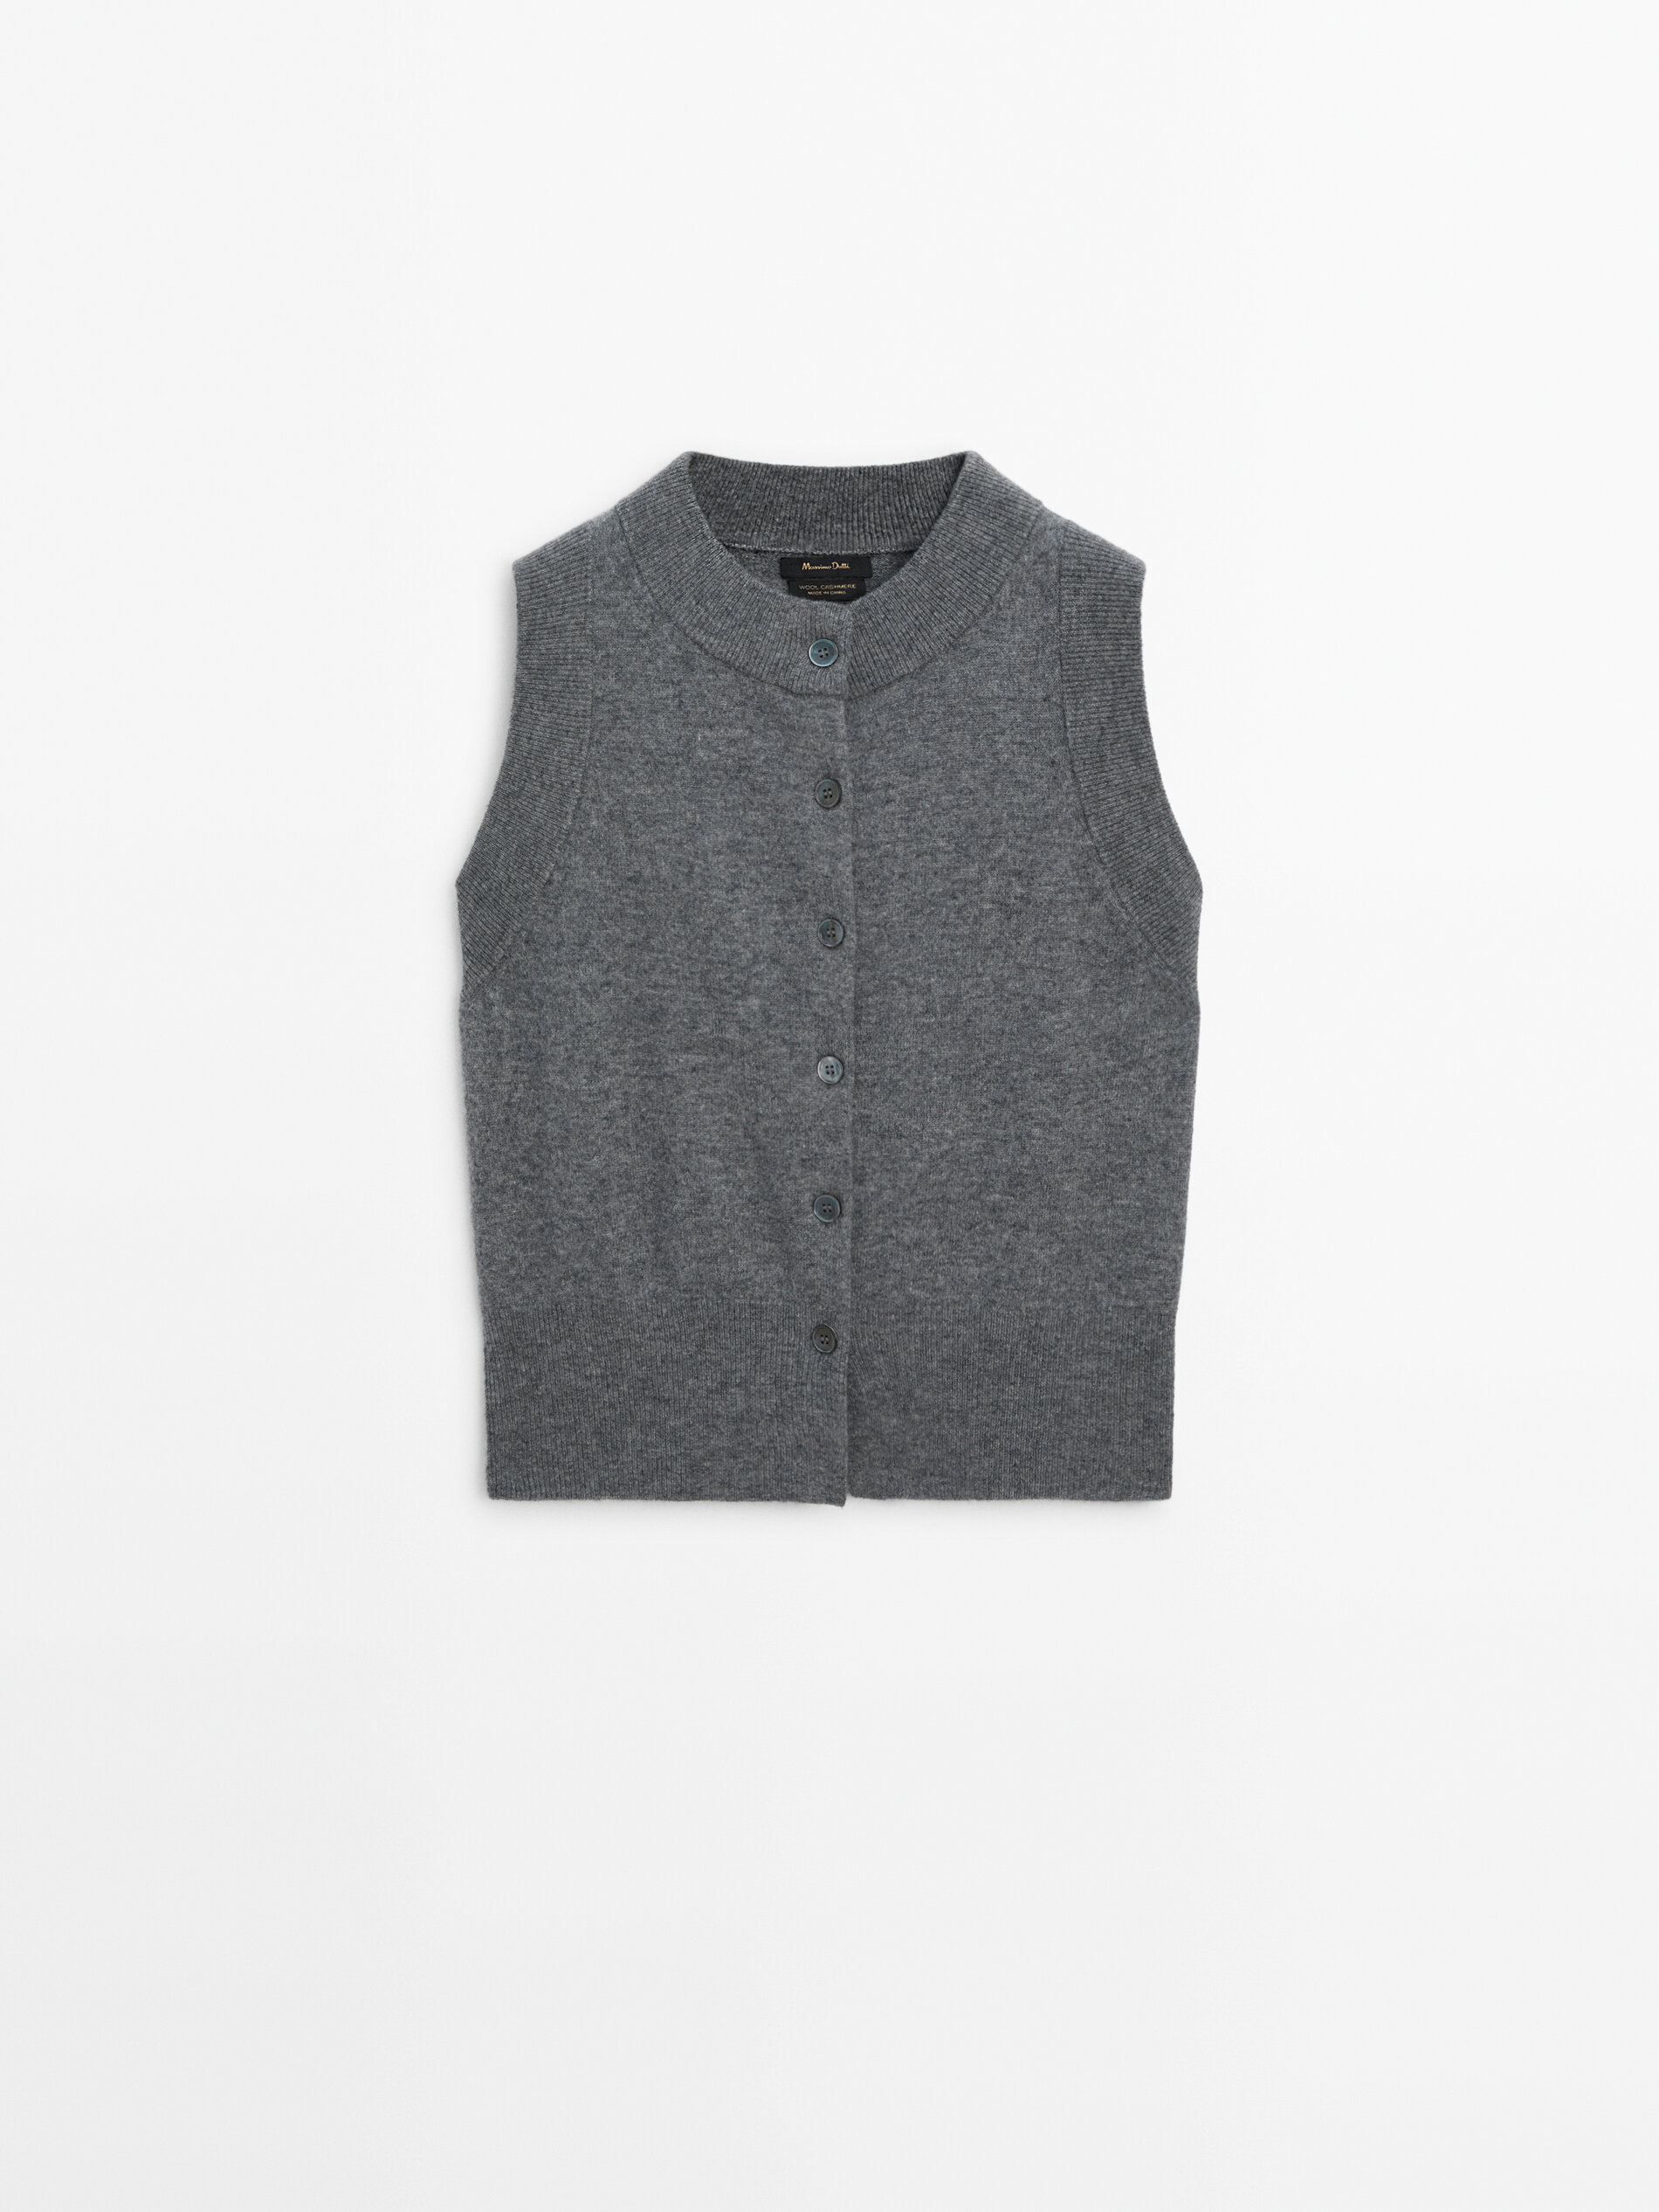 Wool blend knit vest with buttons